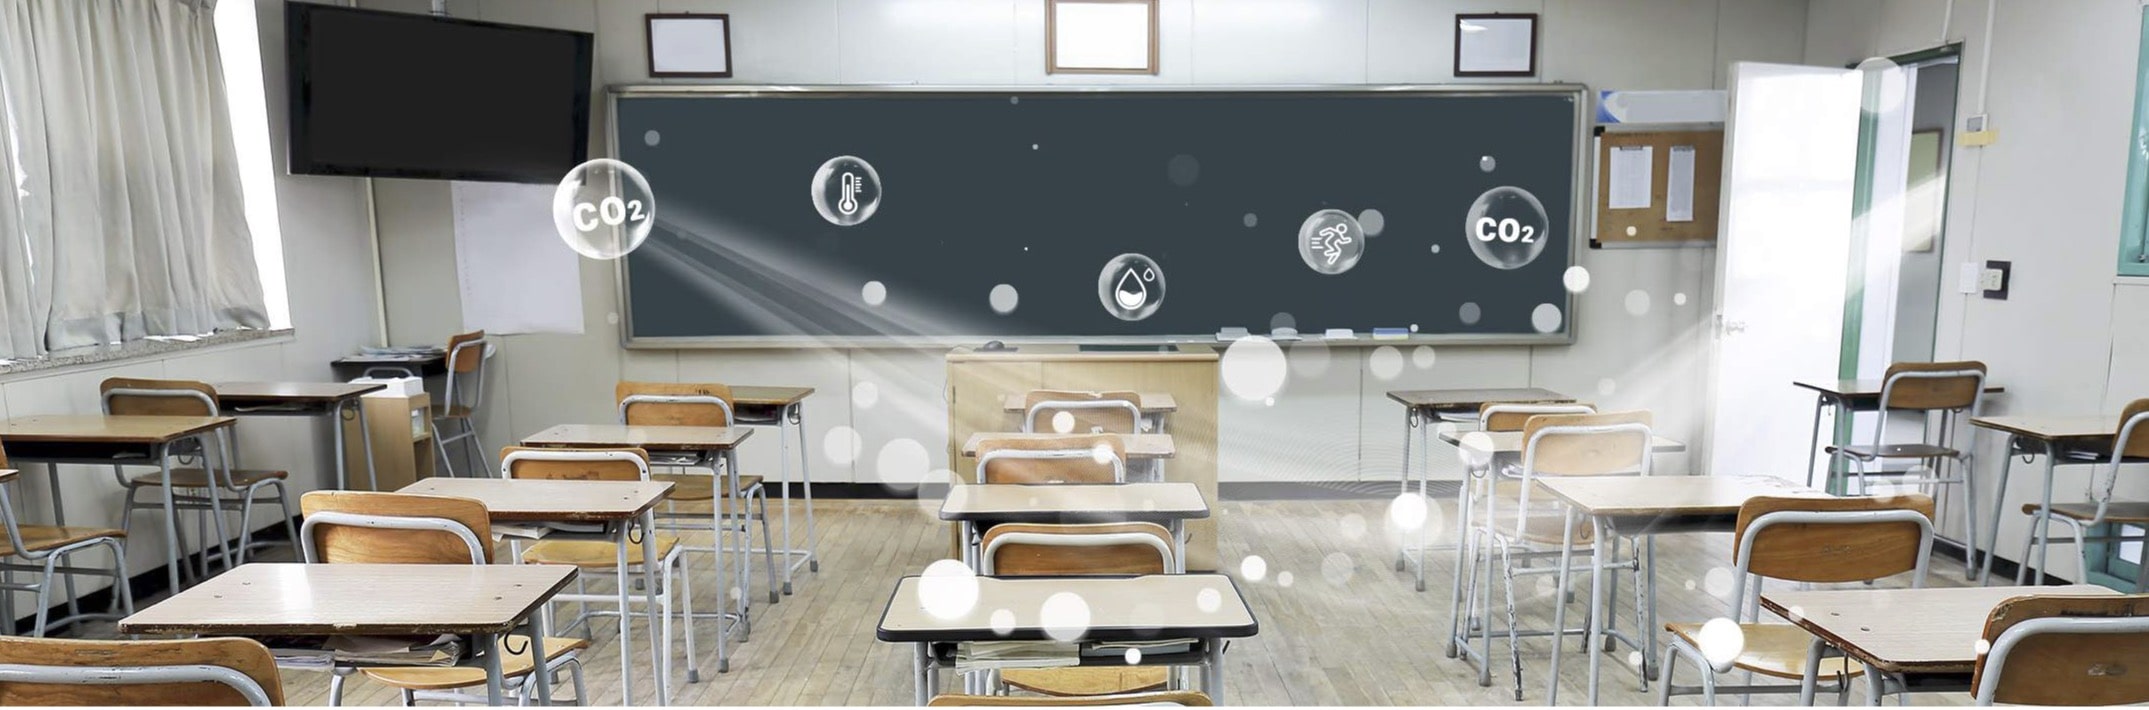 This is an image of a school classroom that is measuring air quality with Milesight IoT technology